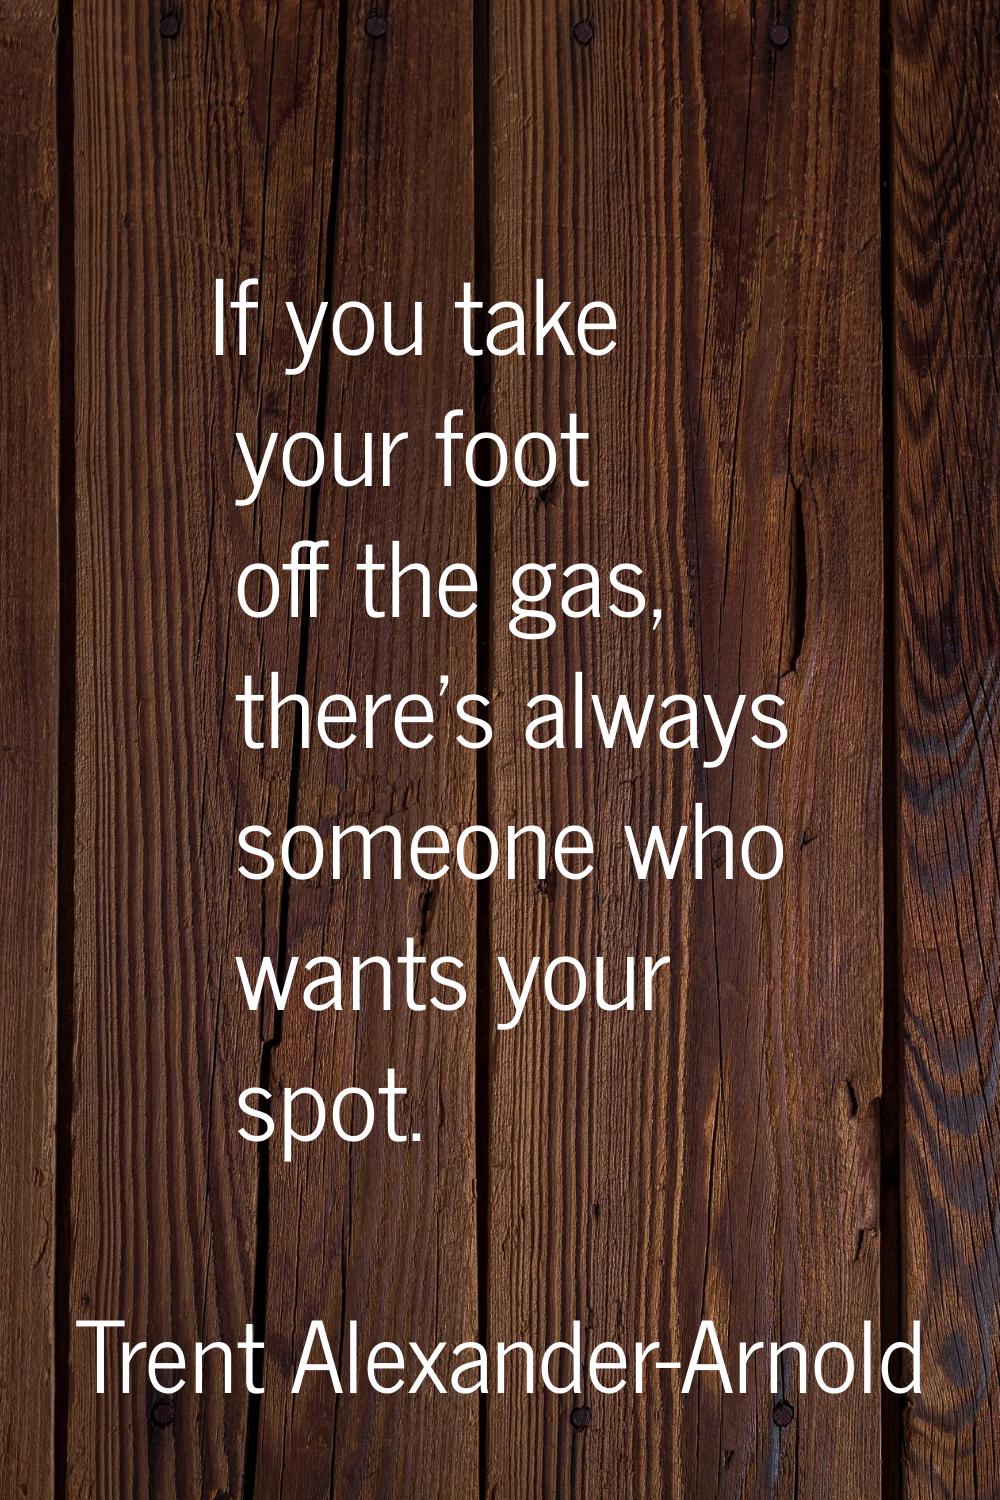 If you take your foot off the gas, there's always someone who wants your spot.